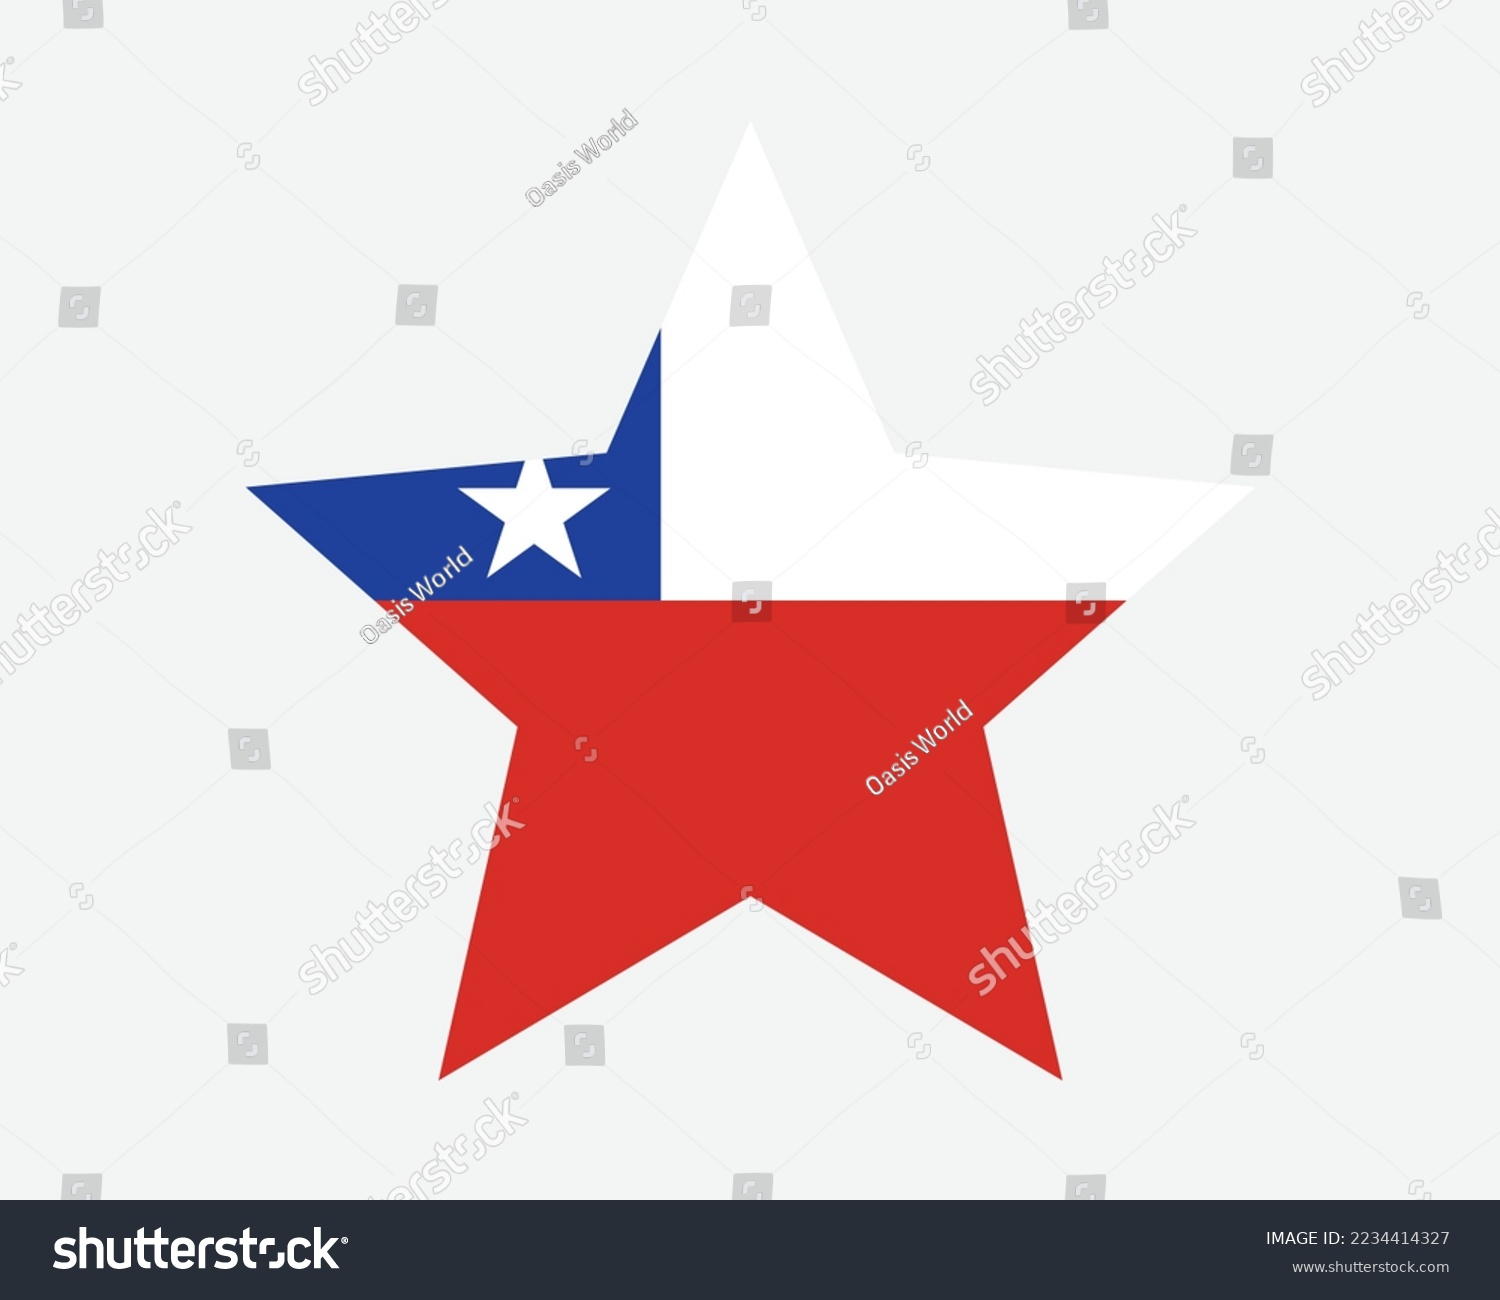 SVG of Chile Star Flag. Chilean Star Shape Flag. Country National Banner Icon Symbol Vector 2D Flat Artwork Graphic Illustration svg